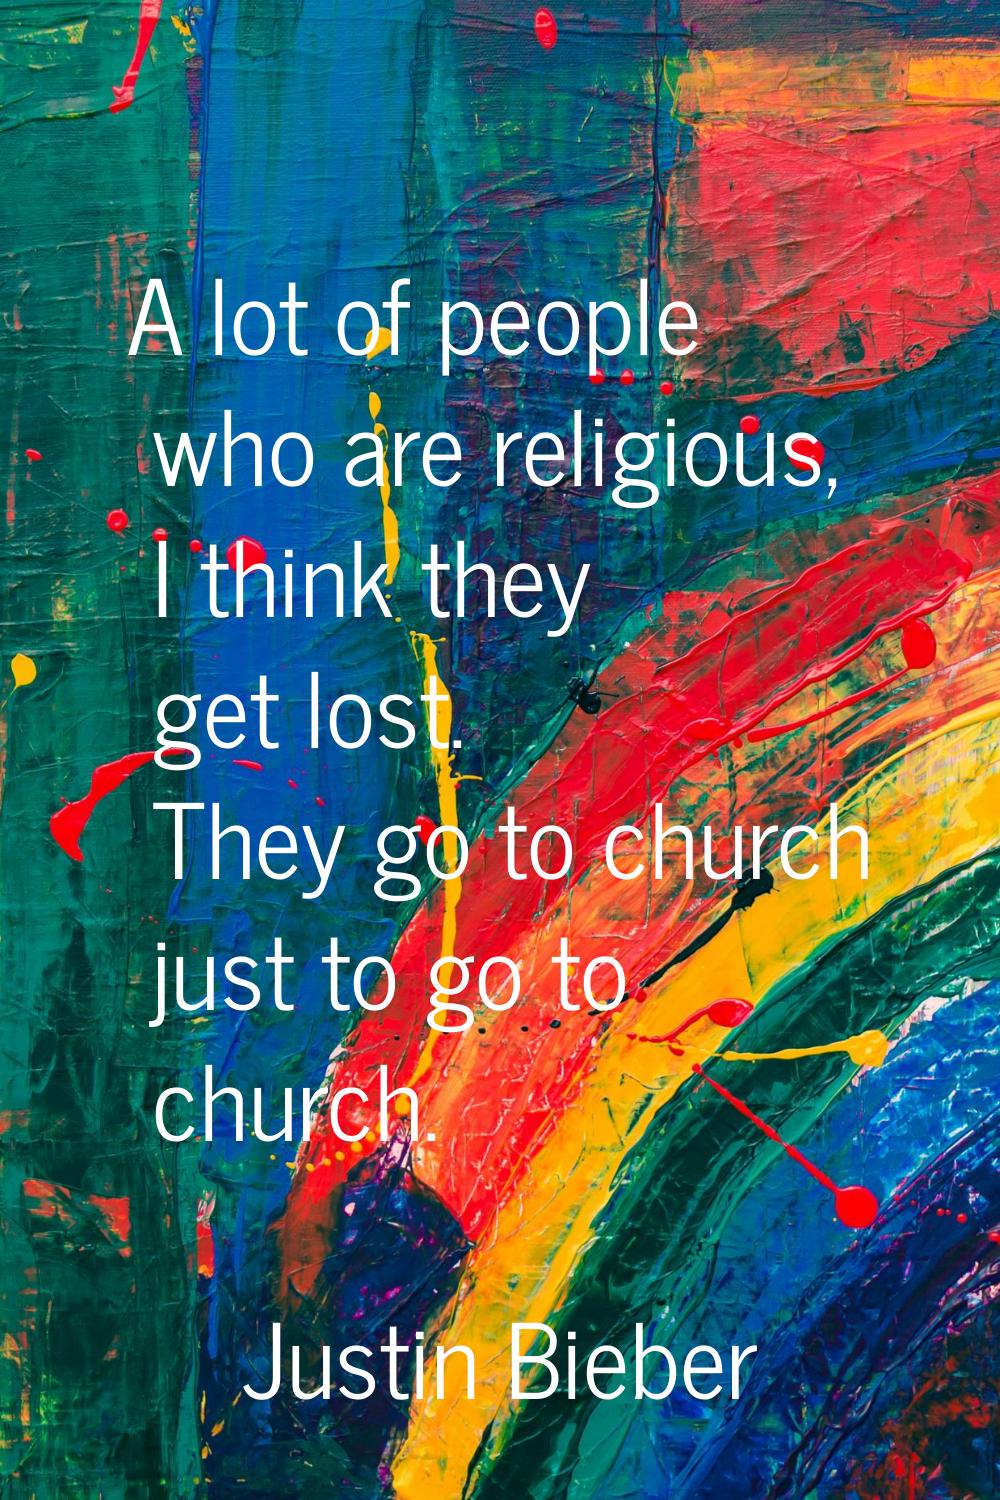 A lot of people who are religious, I think they get lost. They go to church just to go to church.